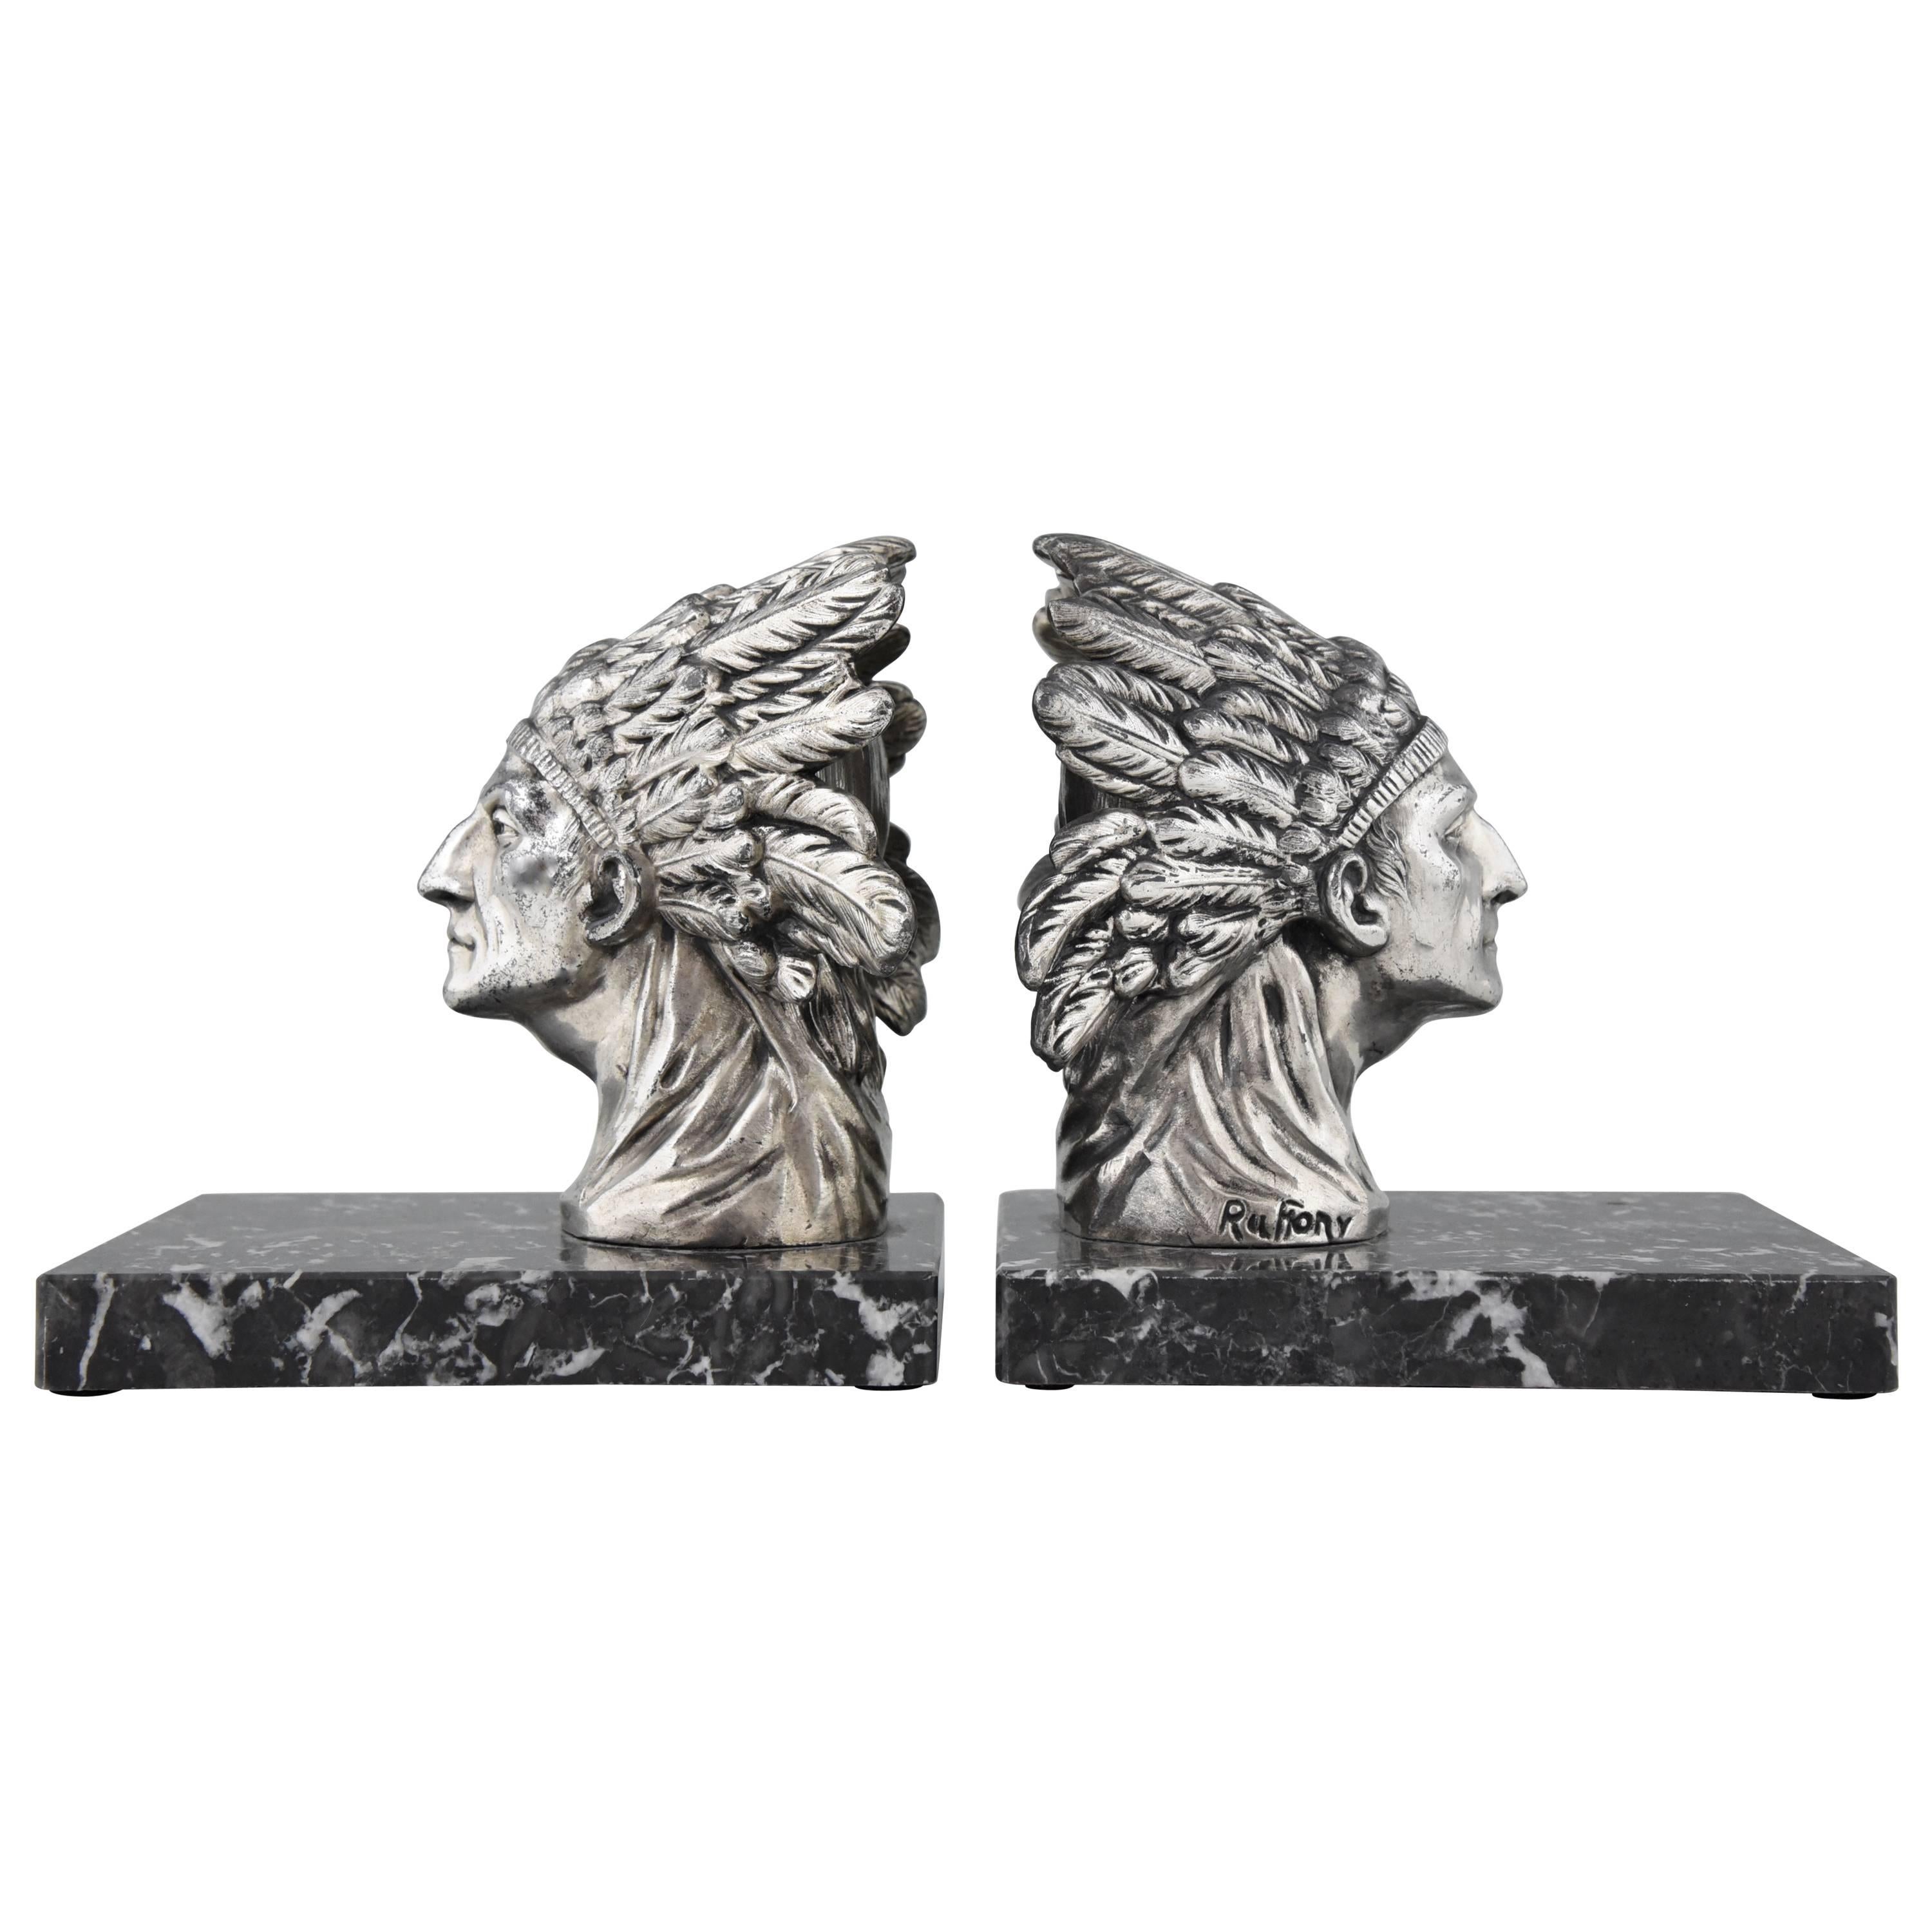 French Art Deco Indian Bookends by Ruffony on Marble Base, 1930